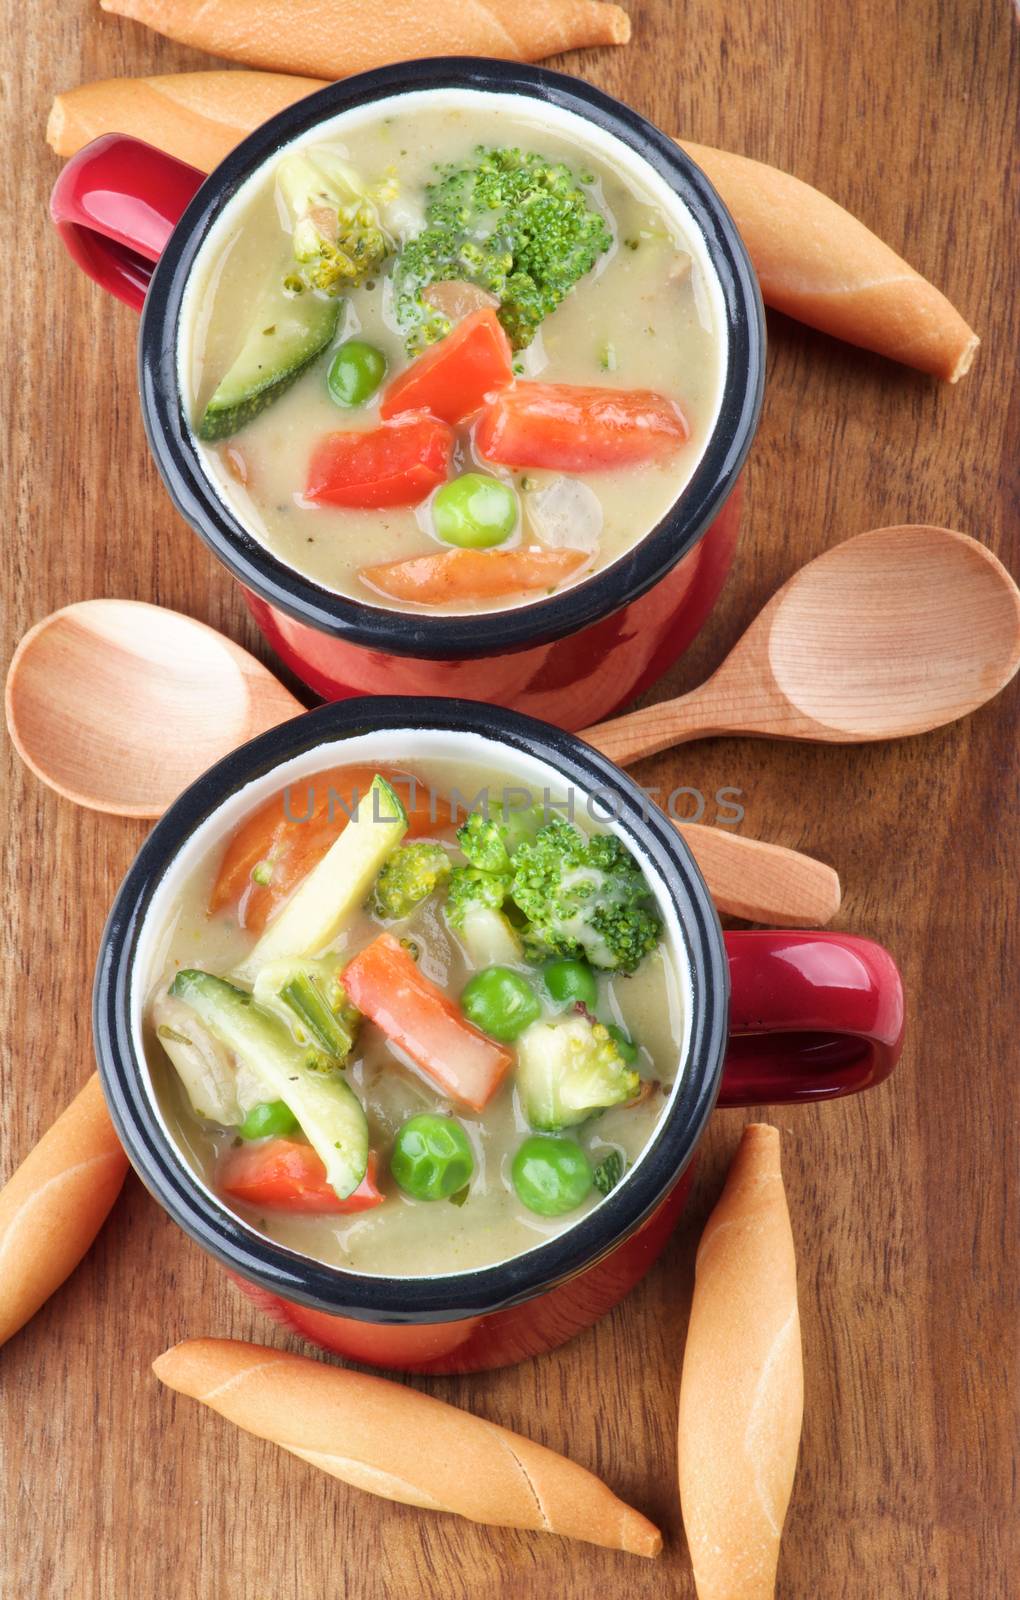 Delicious Homemade Vegetables Creamy Soup with Broccoli, Carrots, Zucchini, Leek, Red Bell Pepper and Green Pea in Red Soup Cups with Wooden Spoon and Bread Sticks closeup on Wooden Cutting Board